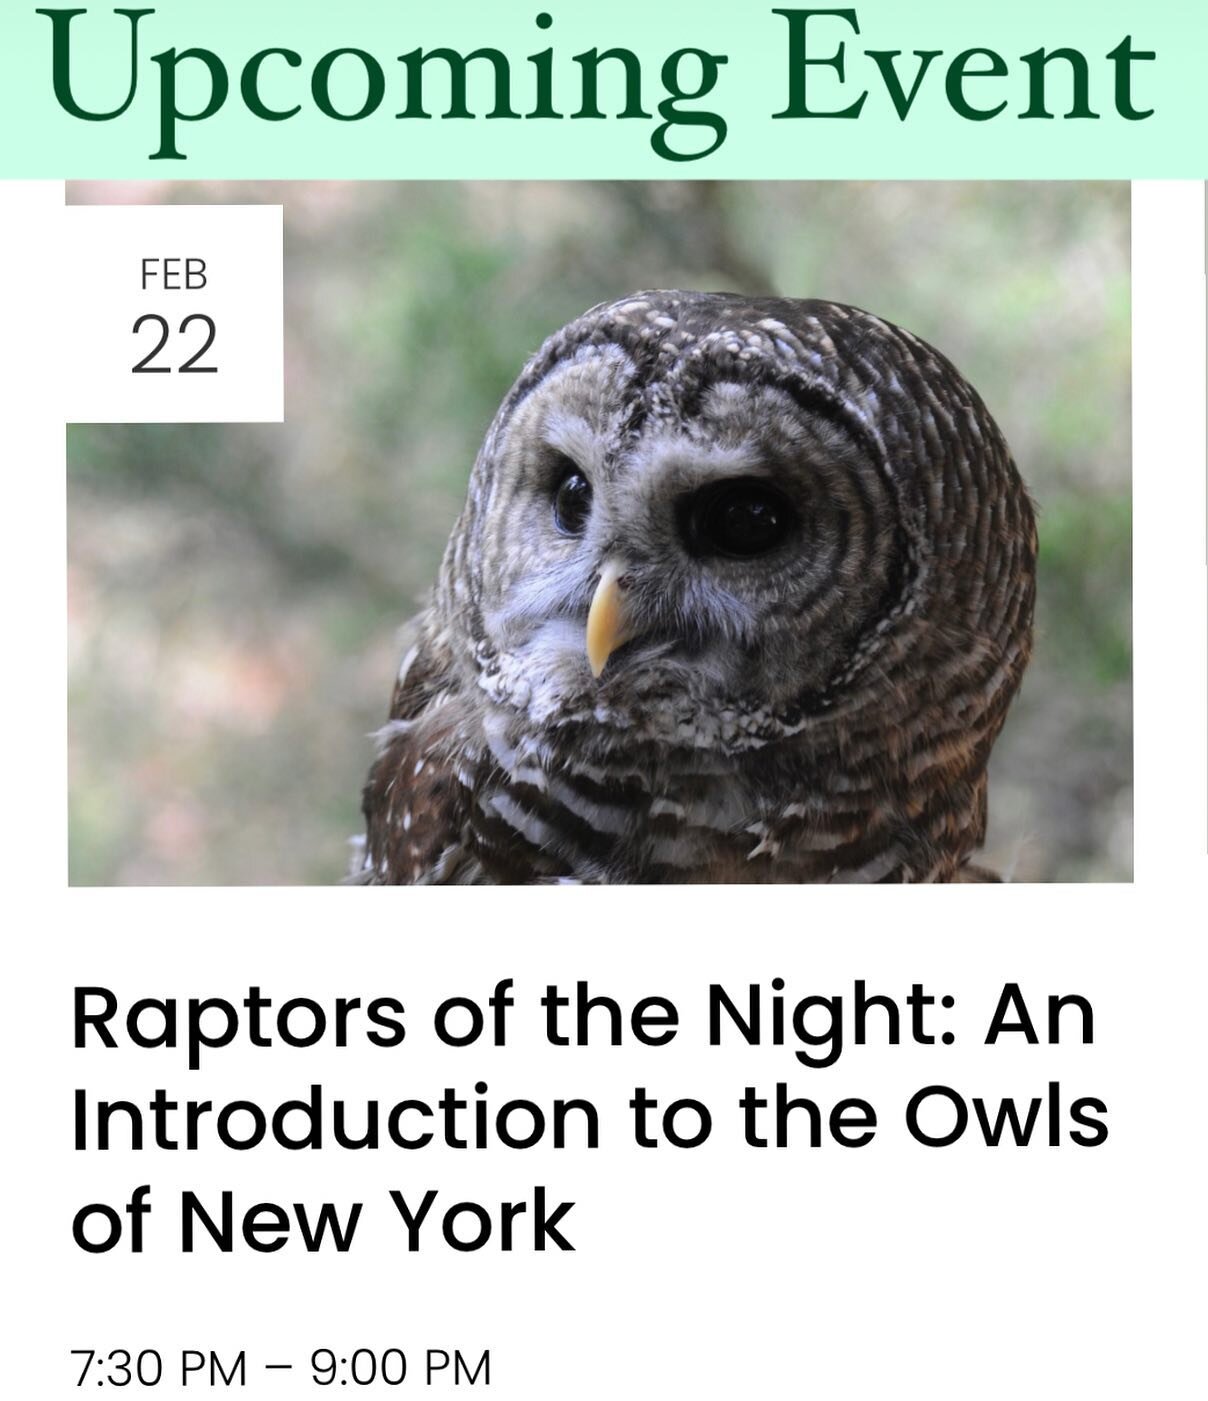 🦉JOIN PRLC on Wednesday, February 22nd at 7:30 pm for a special Zoom event about our local owls. Register at the link in our bio 🔗
 
Owls (Order: Strigiformes) are a nearly cosmopolitan group of primarily solitary, nocturnal birds of prey. Frequent